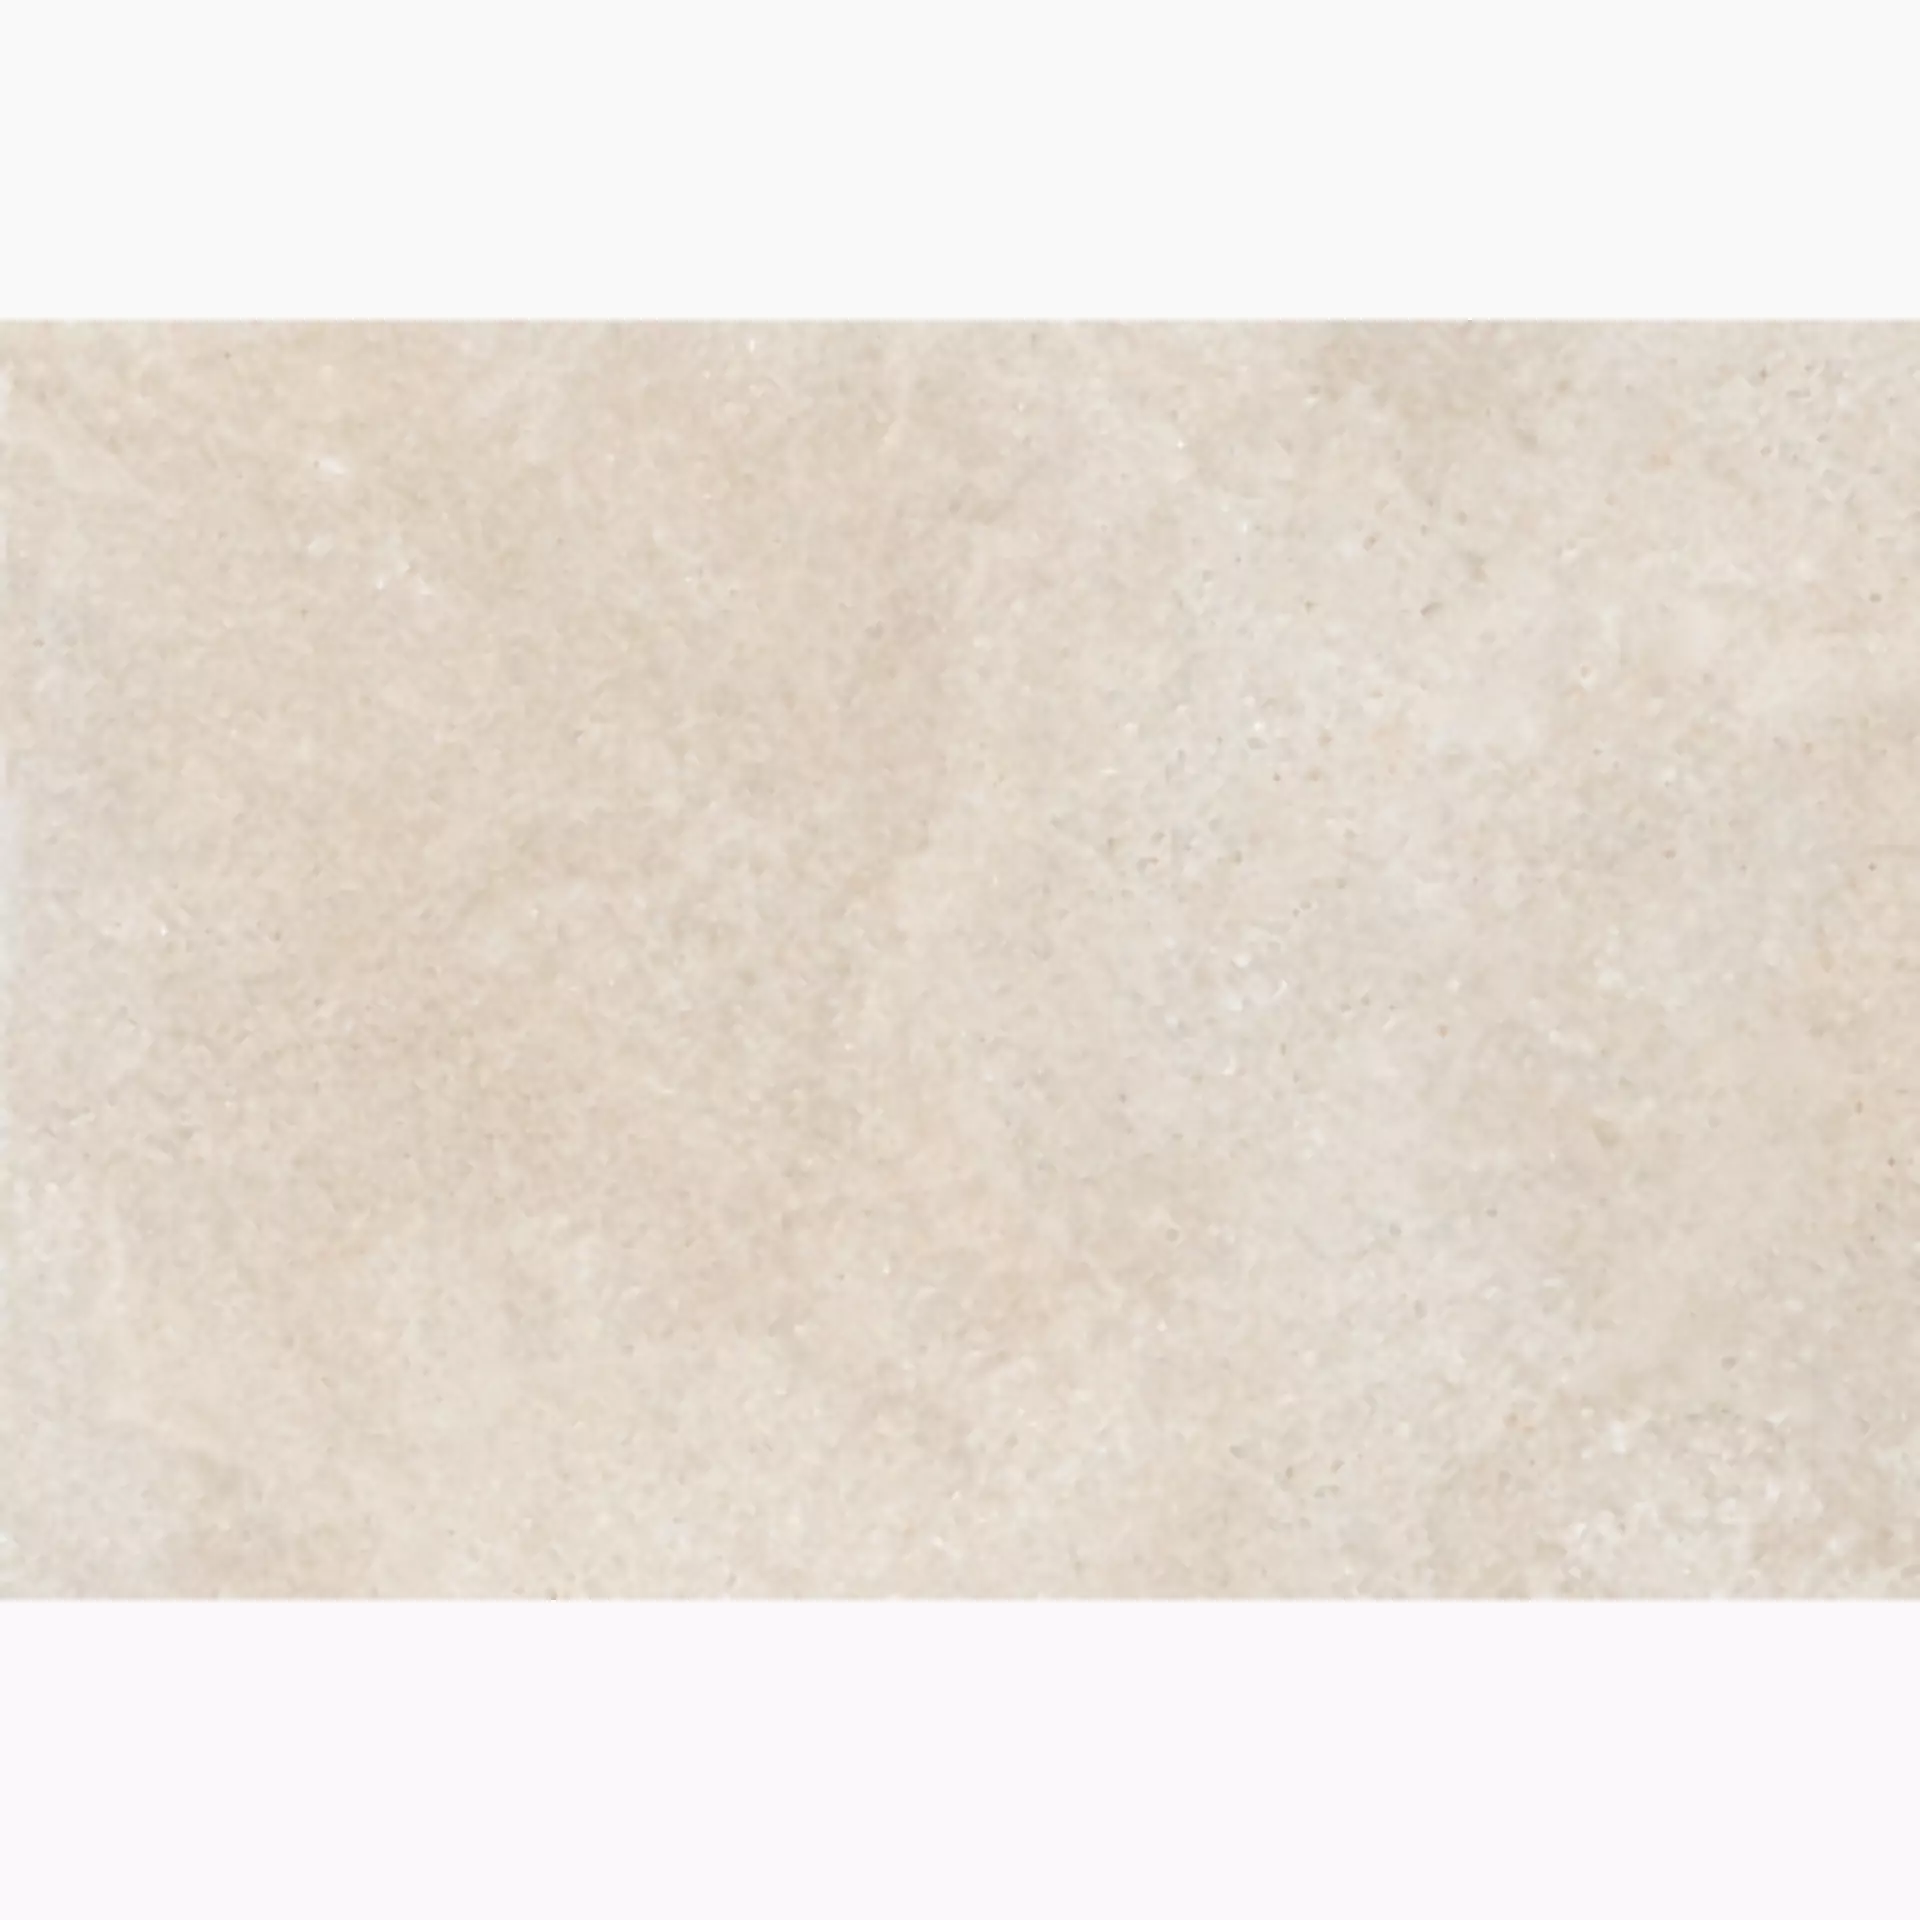 Keope Brystone Ivory Strutturato 44595733 60x90cm rectified 20mm